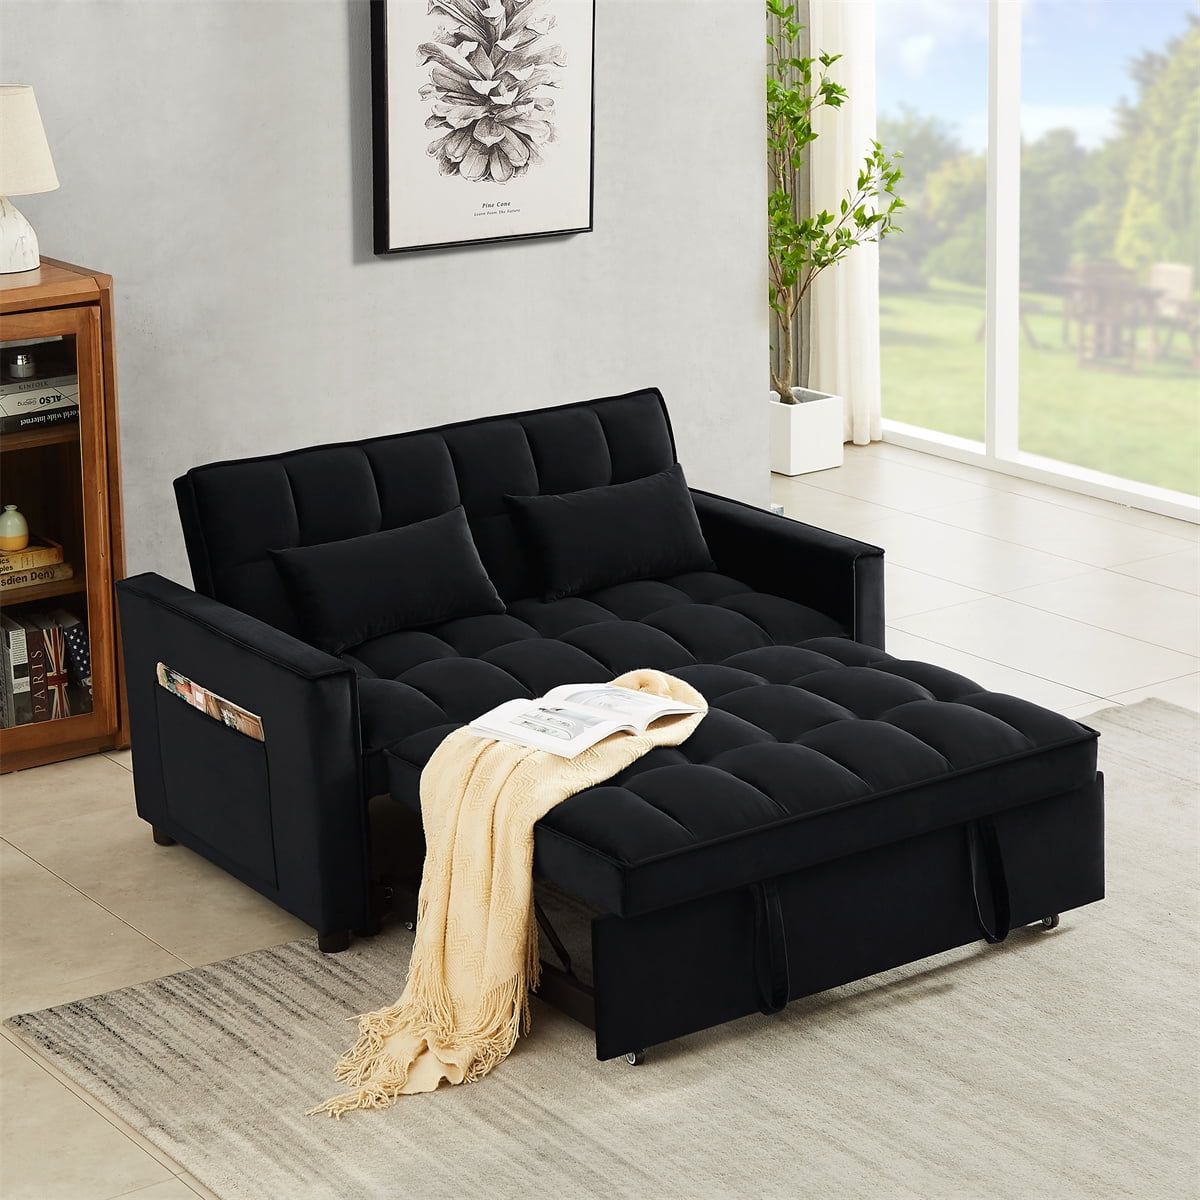 Convertible Sleeper Sofa Loveseat Sofa Bed Couch With Adjustable  Backrest,Modern Velvet 2 Seater Sofa With Pull Out Bed,Side Pocket And 2  Lumbar Pillows Lounge Chaise For Living Room Apartment,Black – Walmart With Regard To Black Velvet 2 Seater Sofa Beds (Photo 1 of 15)